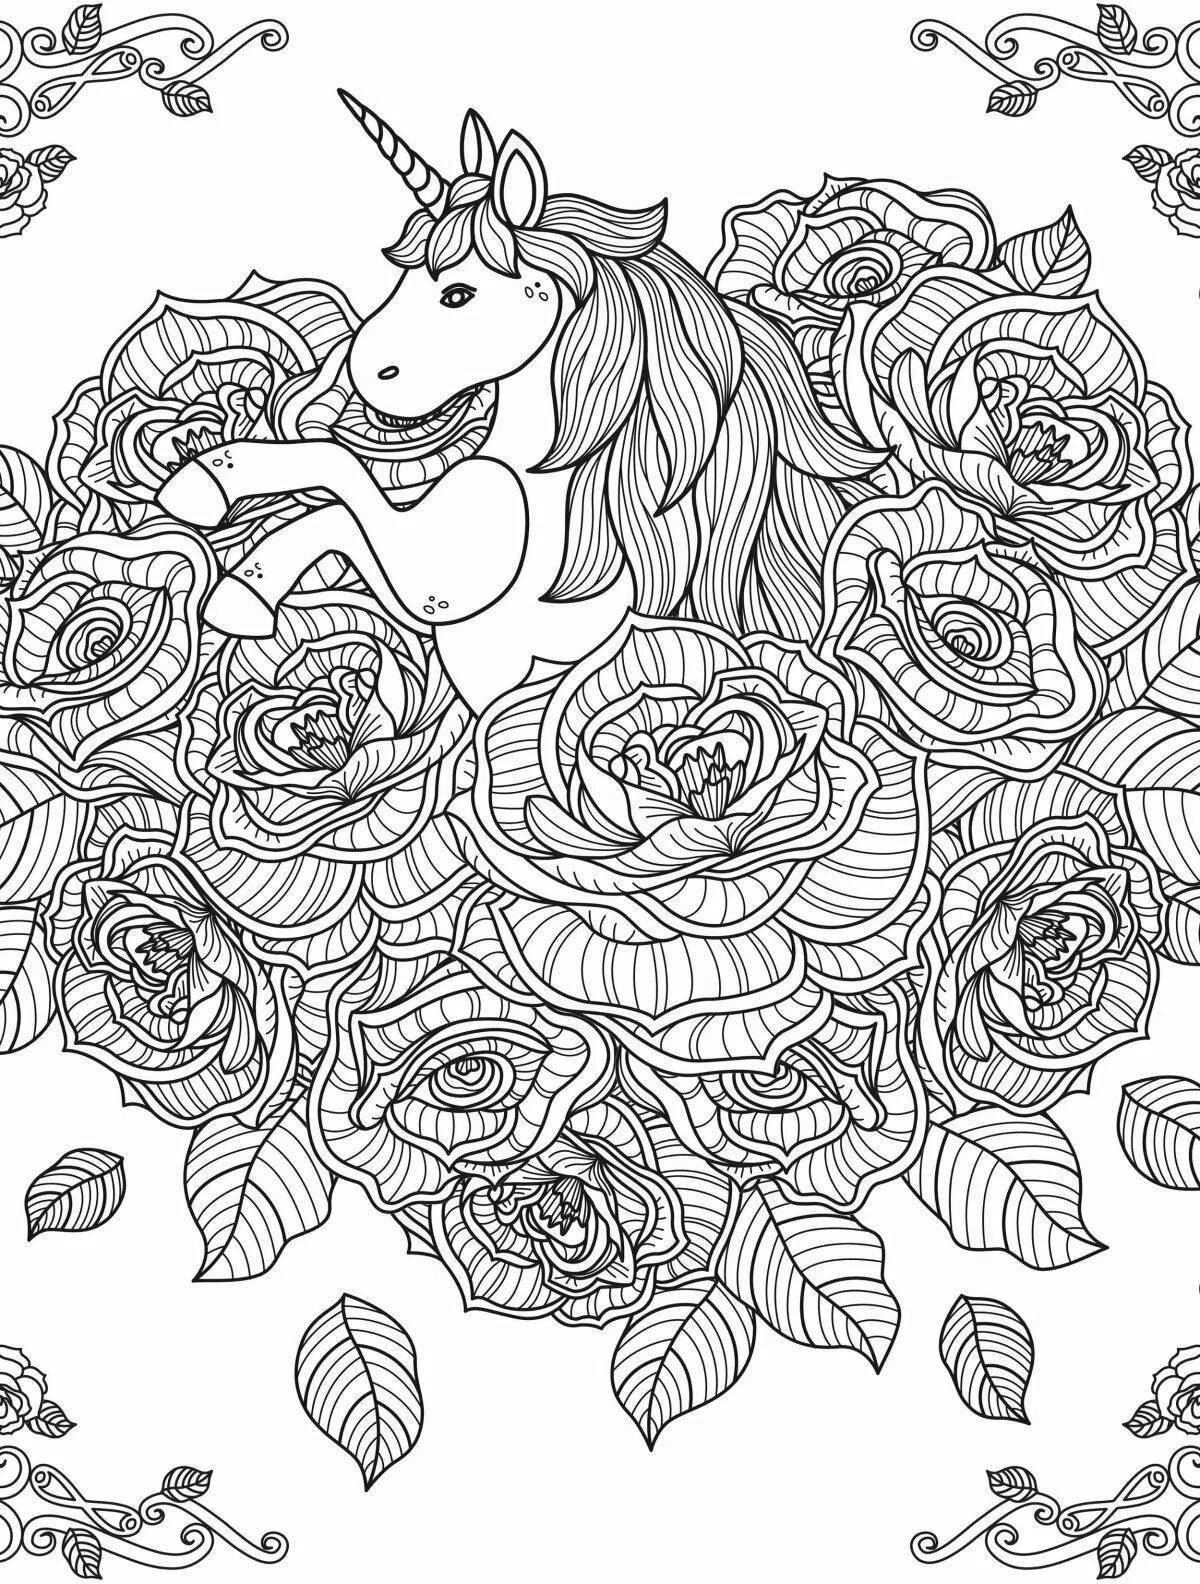 Serene anti-stress coloring page 18